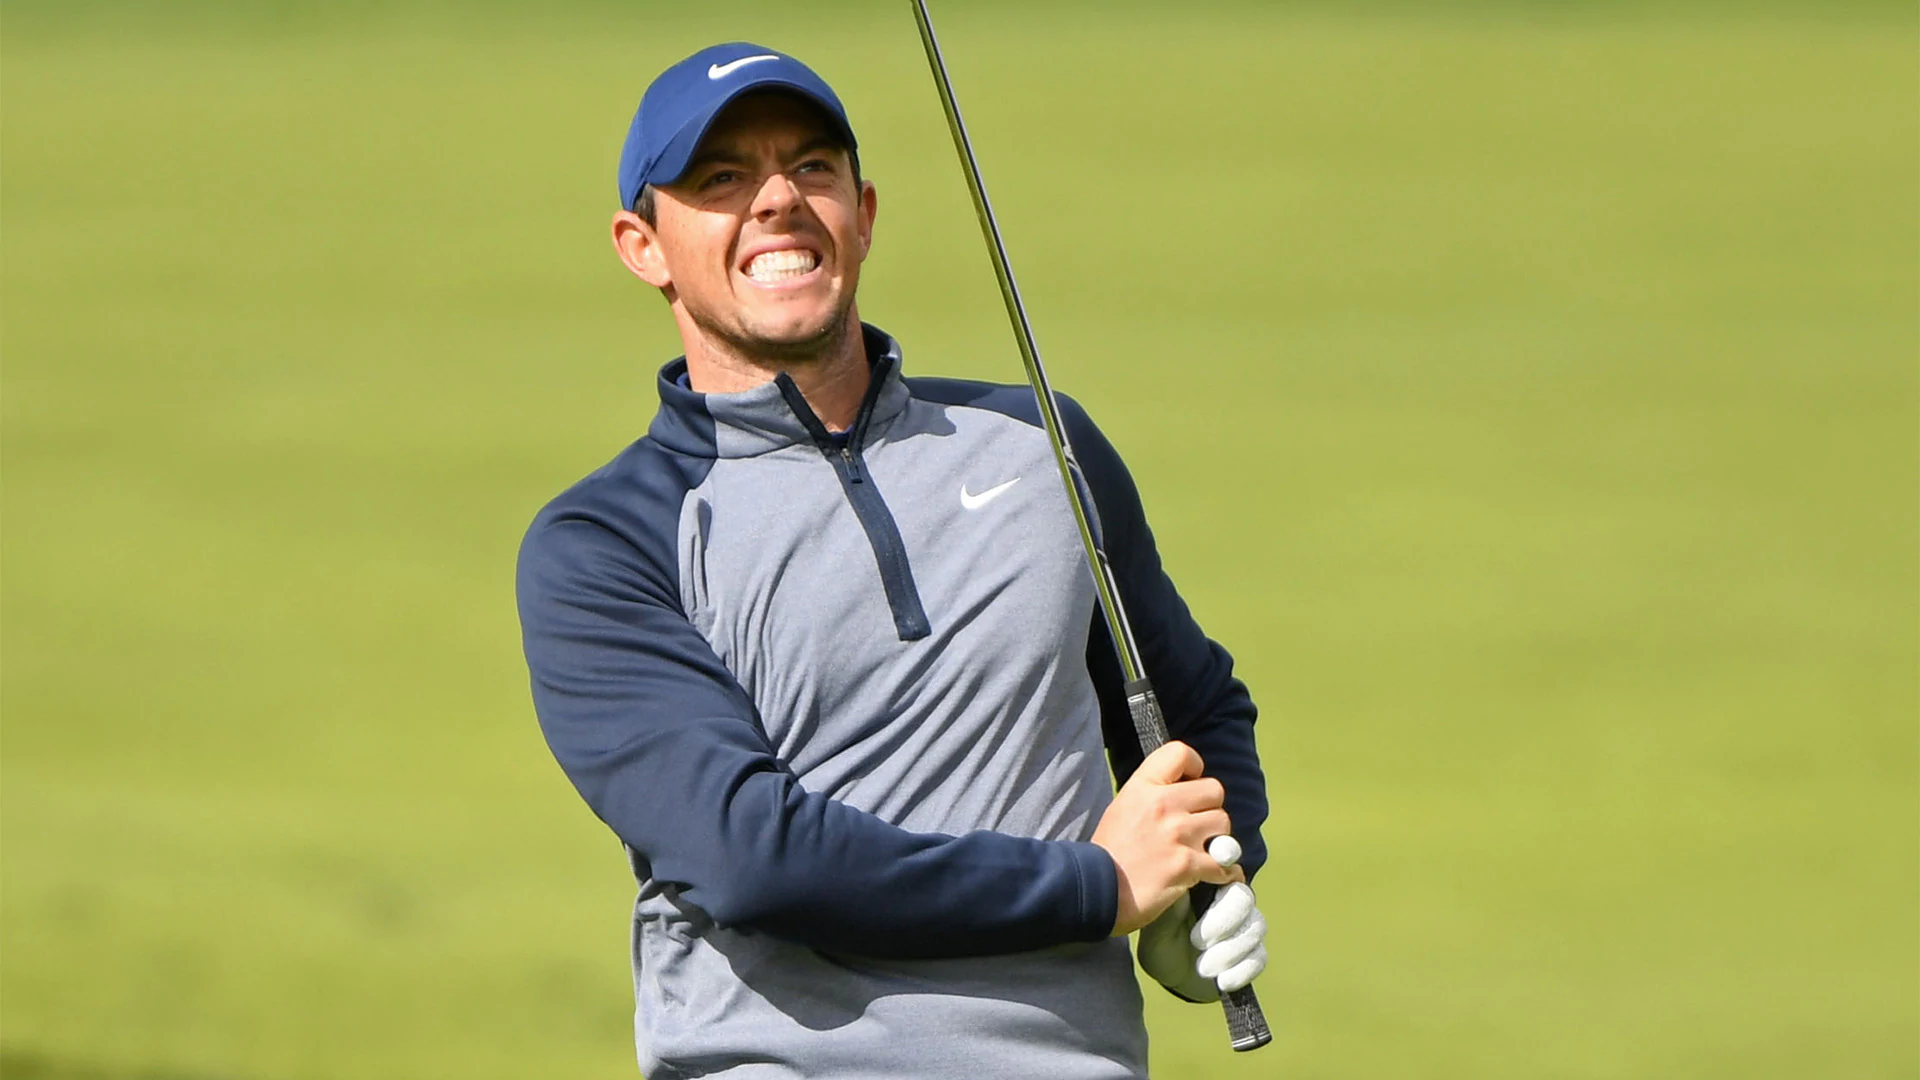 McIlroy's T-4 without best stuff: 'Step in right direction'